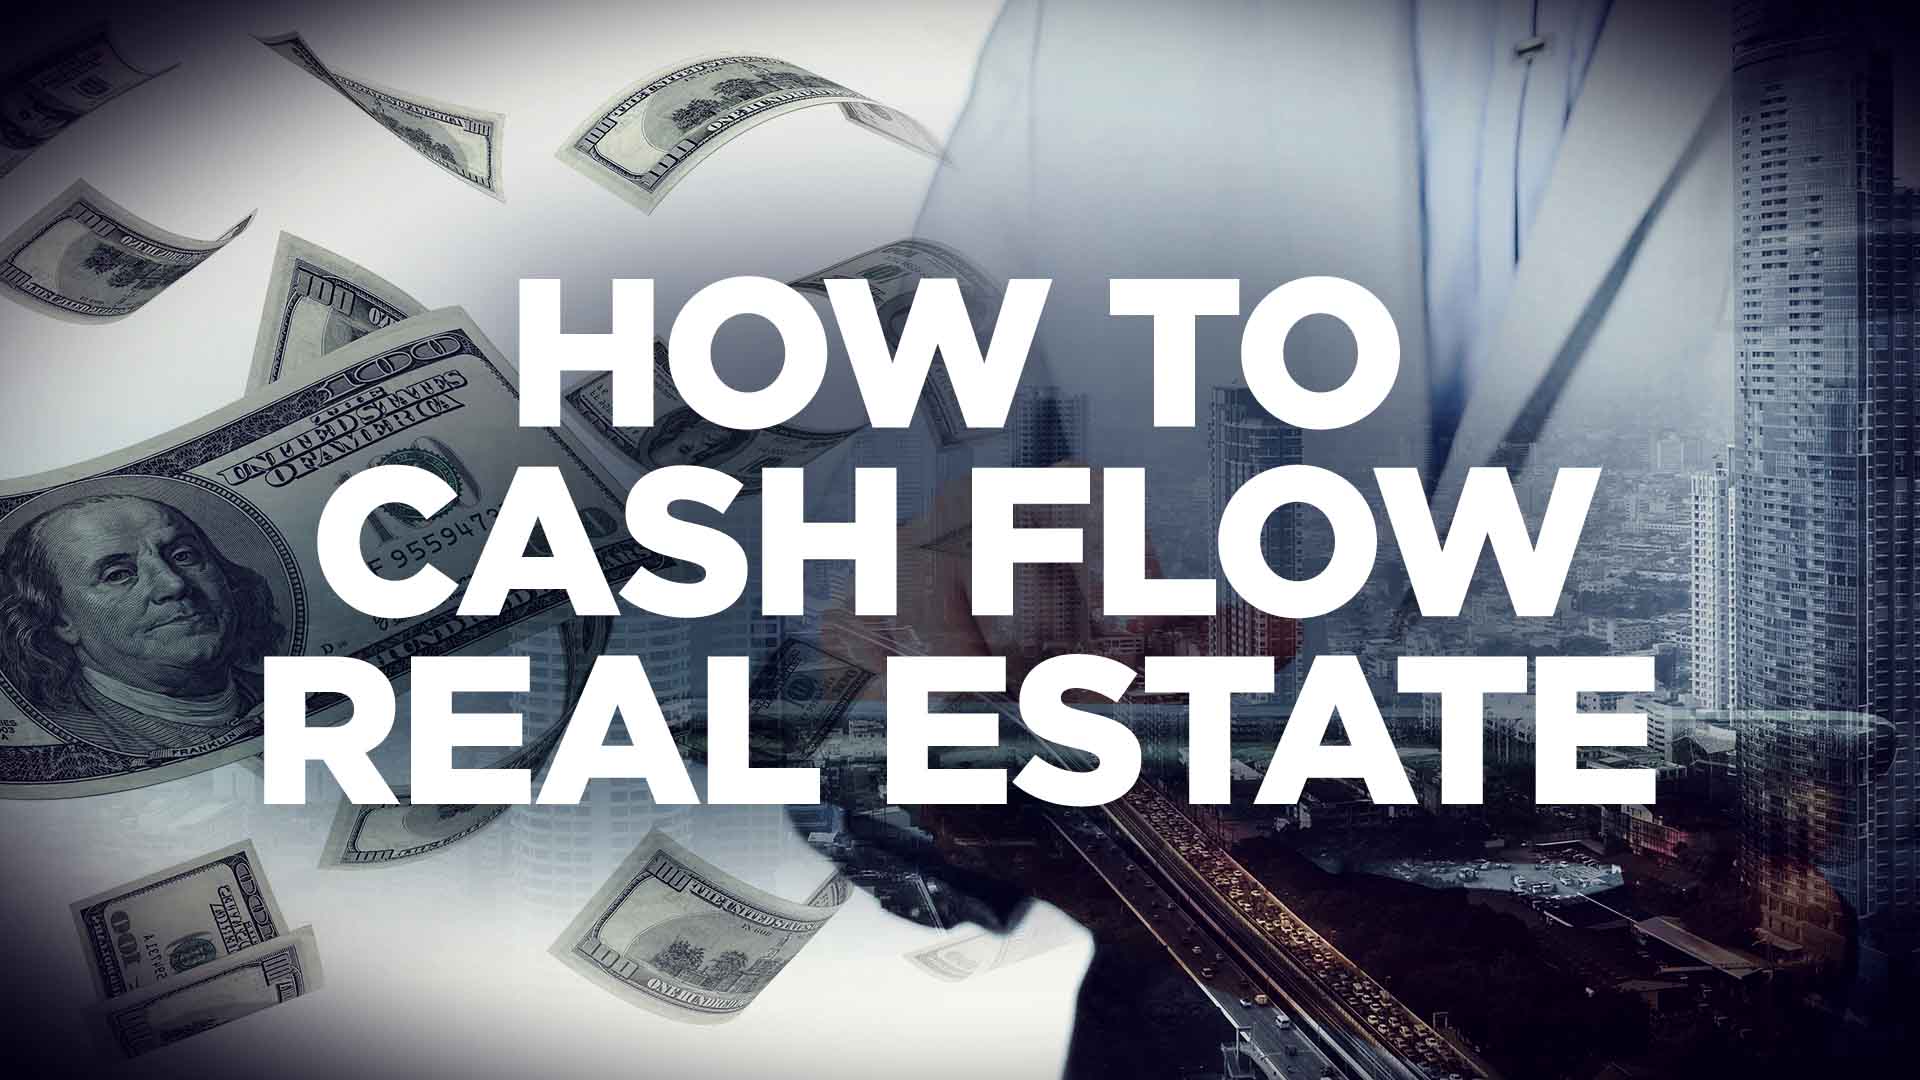 How to Cash Flow Real Estate Real Estate Investing Made Simple with